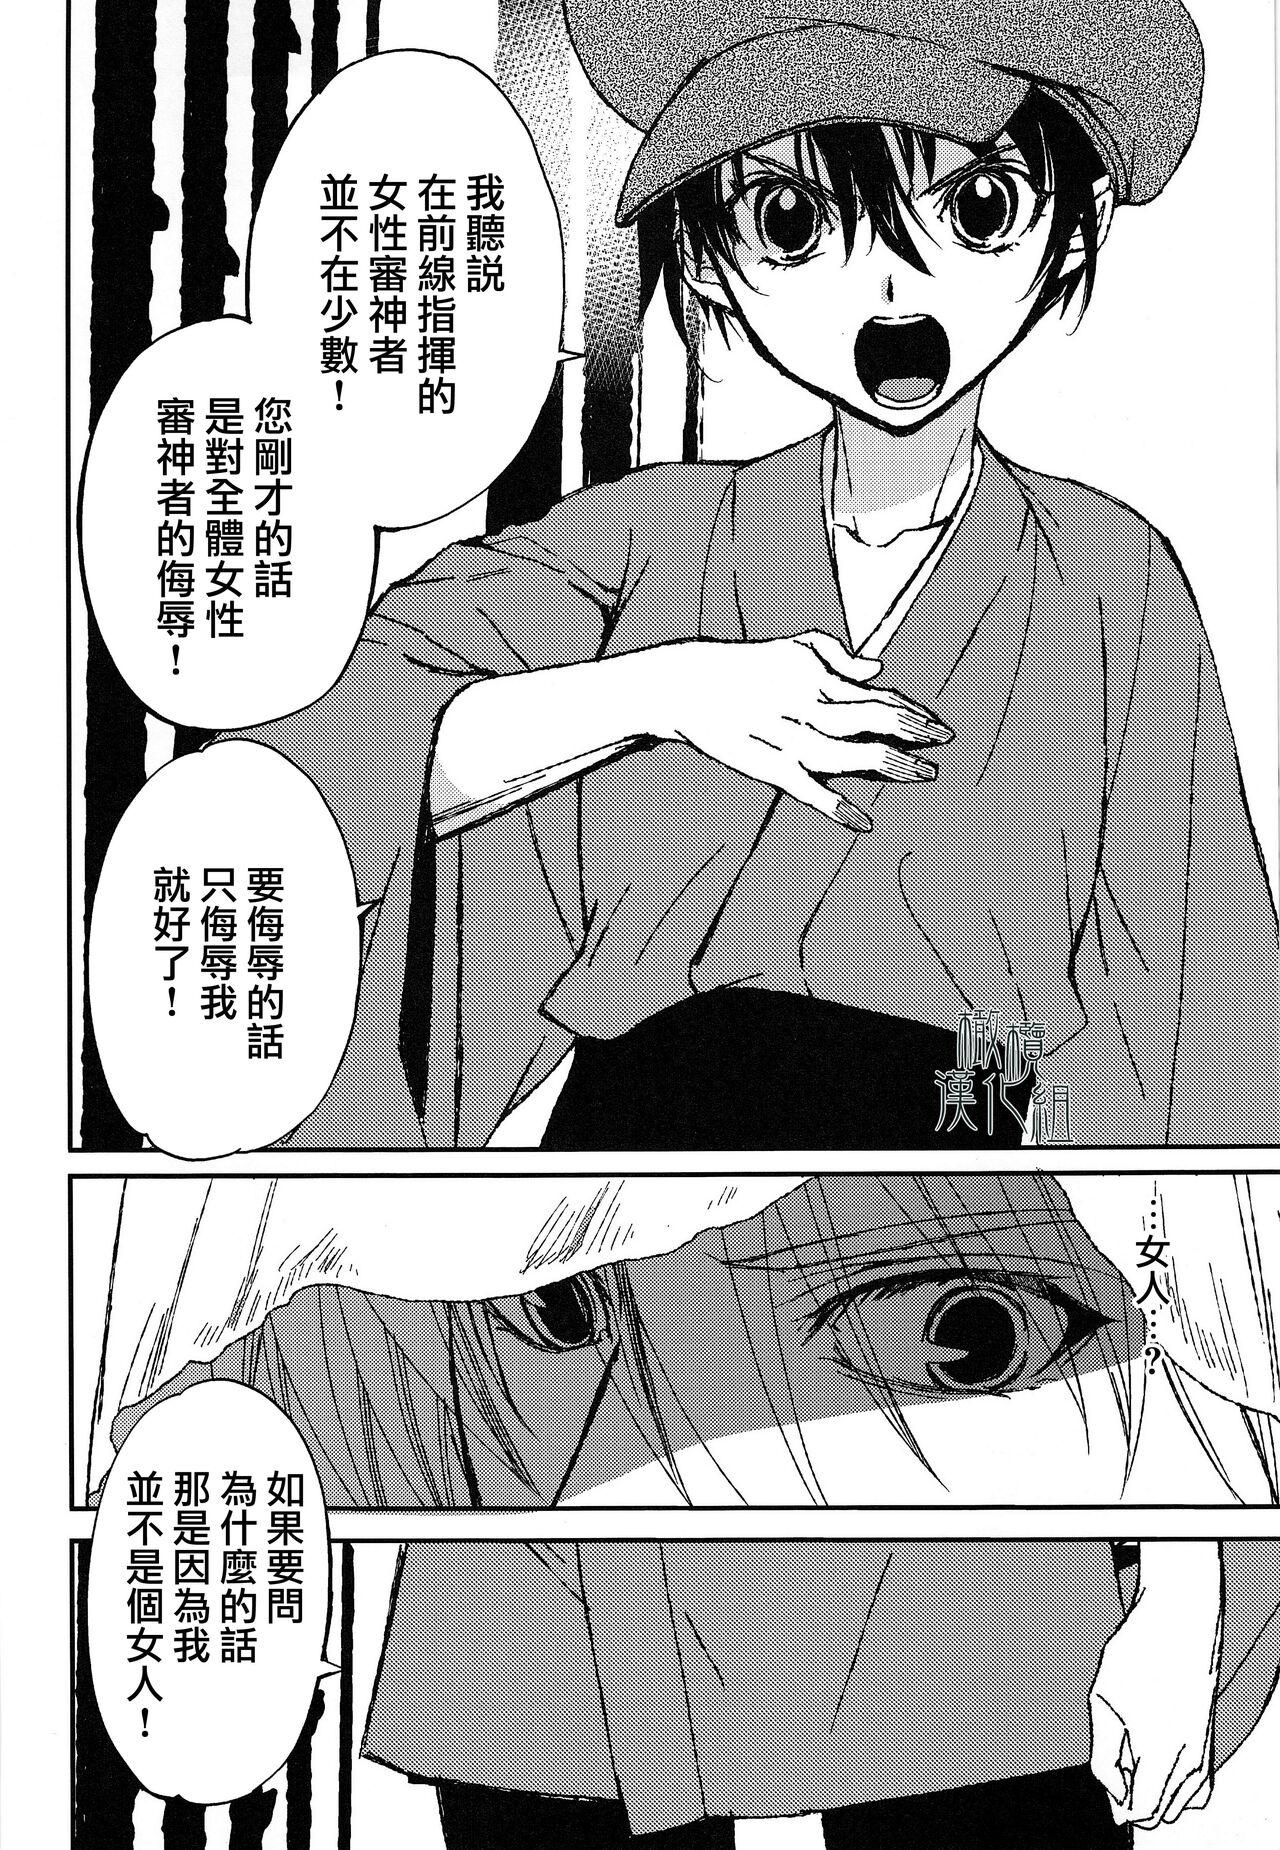 Free Hard Core Porn AFTER THE END - Touken ranbu Softcore - Page 12